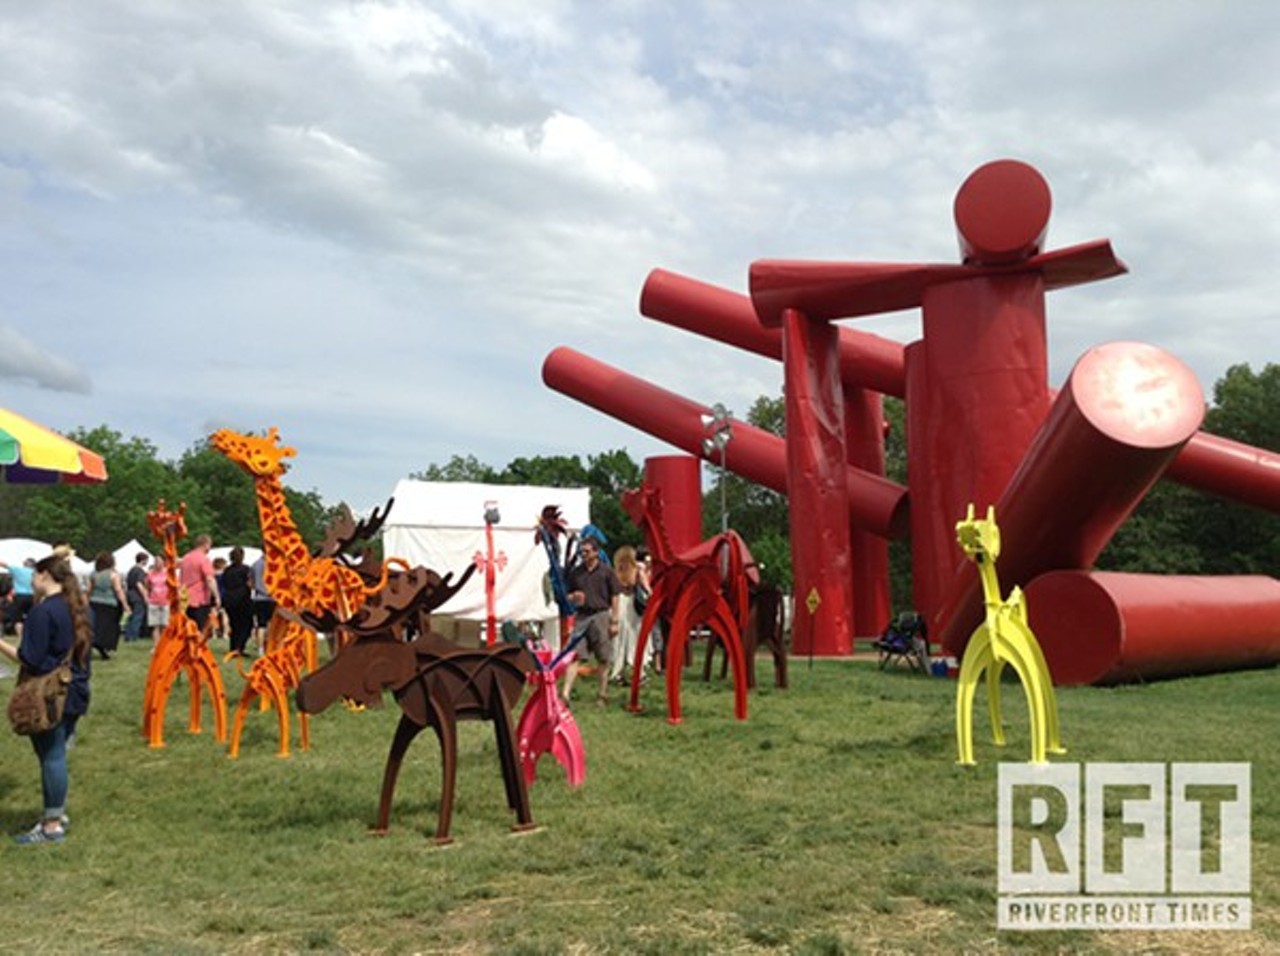 If your mom has an artsy streak, take her to the Laumeier Art Fair.
12580 Rott Rd.
St. Louis, MO 63127
(314) 615 - 5278
Laumeier Sculpture Park is a relaxing oasis for art lovers on any given day, but this weekend you can also enjoy an art fair while you&#146;re there. You&#146;ll find work from 150 juried artists from across the U.S., beer and wine tasting events, local food and beverage vendors and live music. If you&#146;ve procrastinated getting your mom a gift, this would be the perfect time and place to buy her something unique&#133;.just saying. RFT photo.